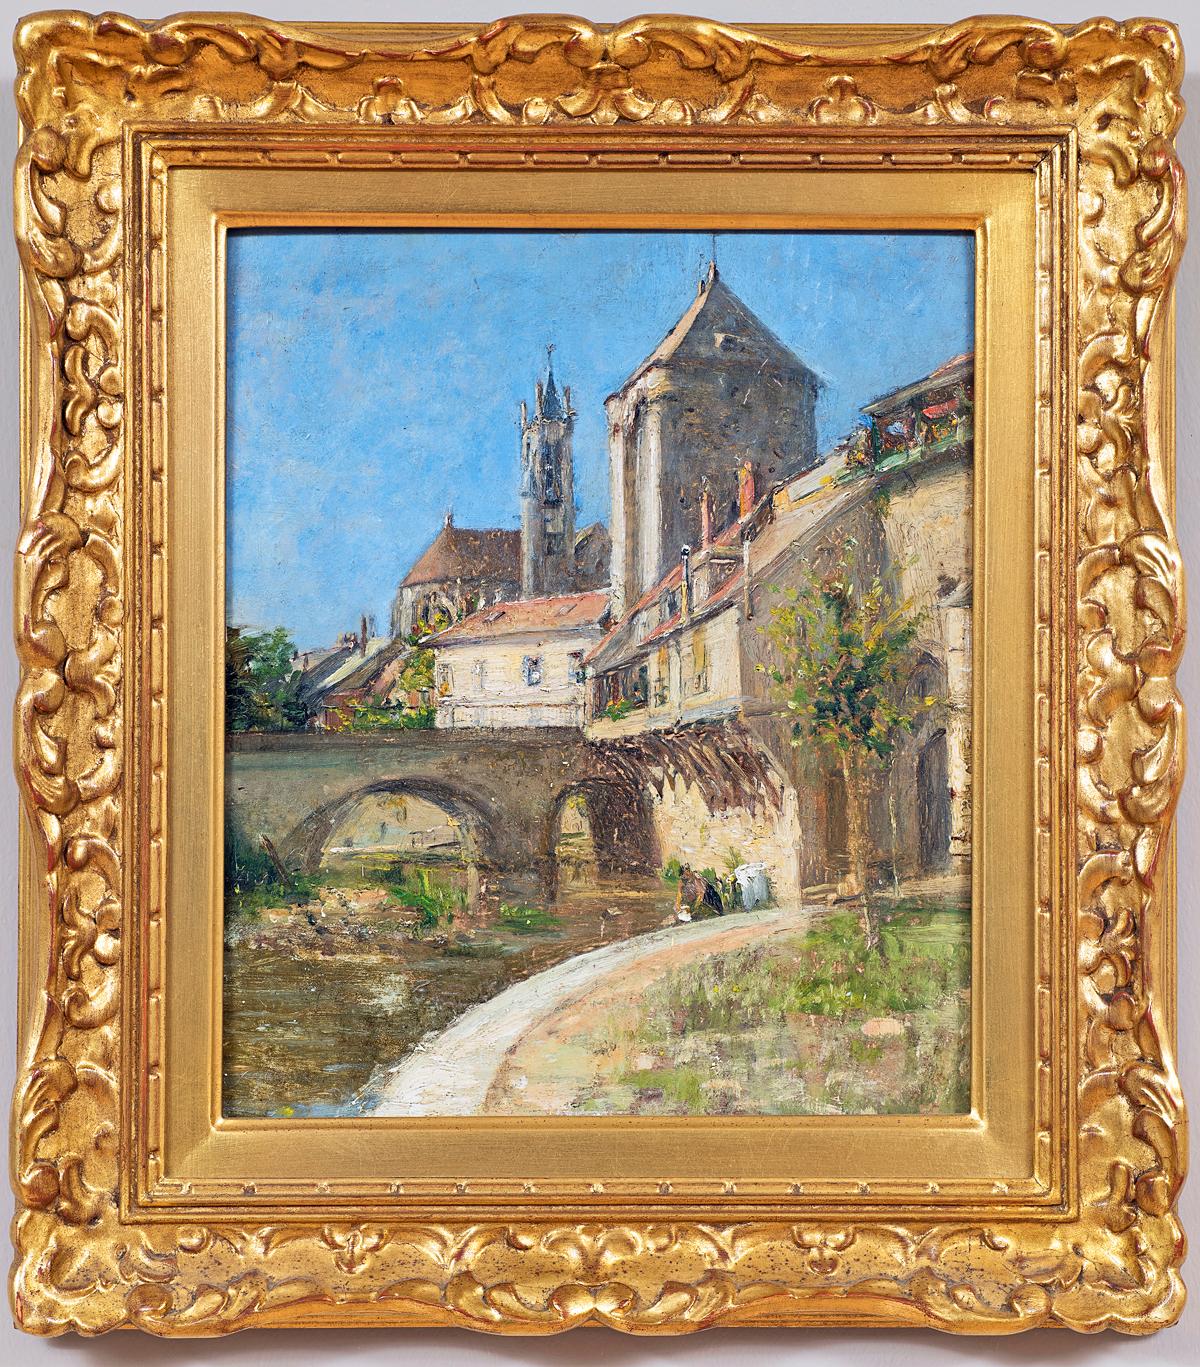 Unknown Landscape Painting - "Moret-Sur-Loing" French Impressionist School Oil Painting on Wood Panel